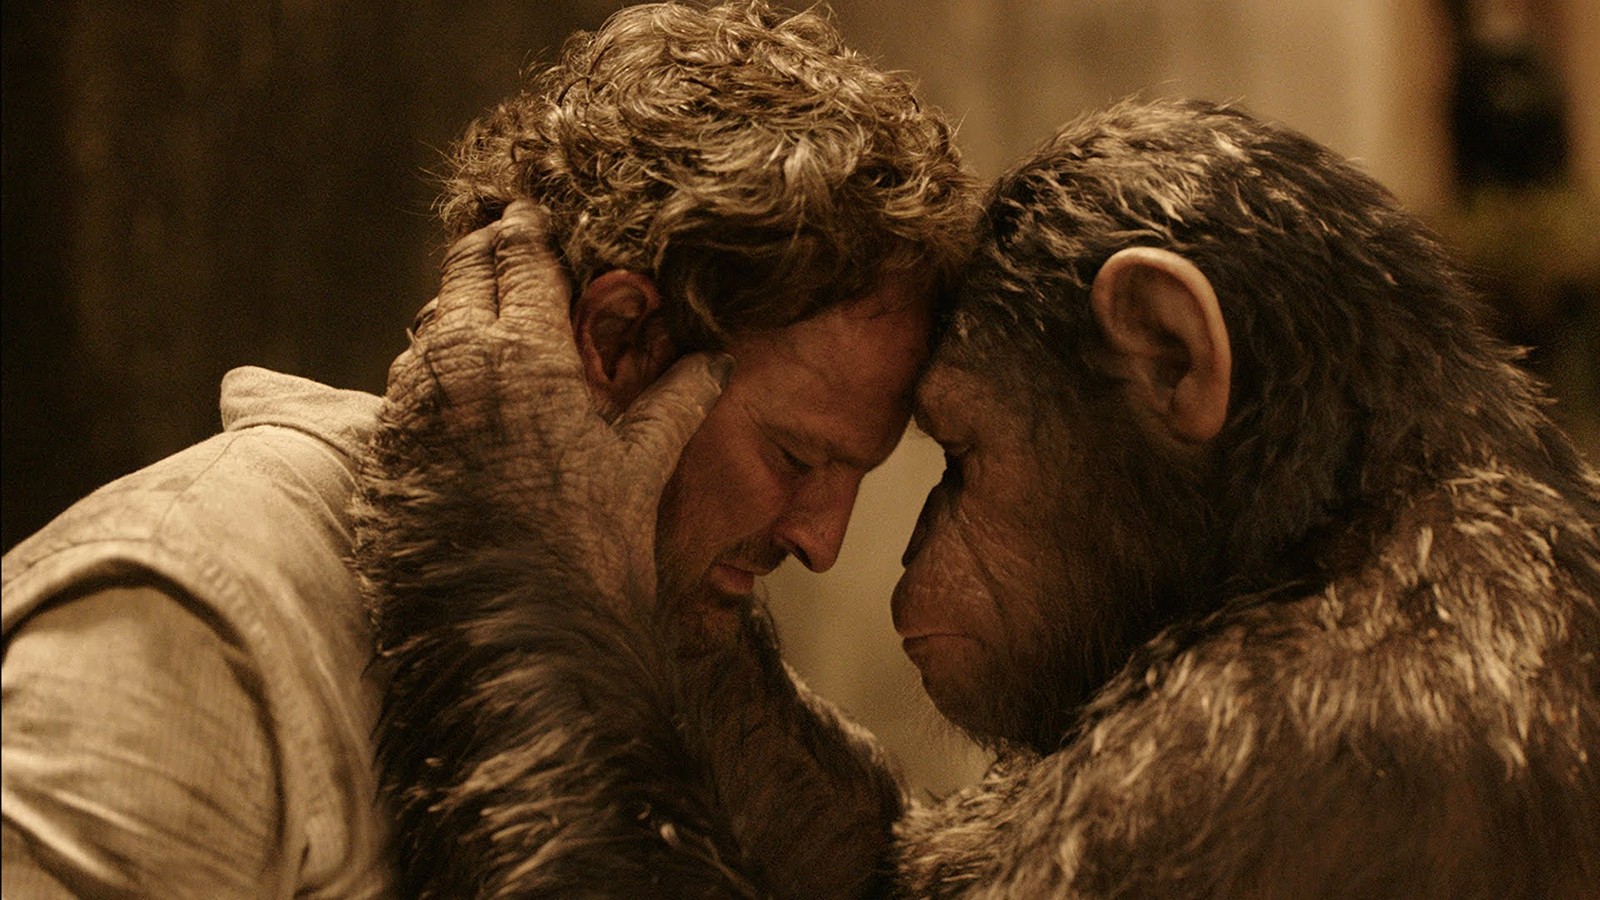 Dawn of the Planet of the Apes (2014) 